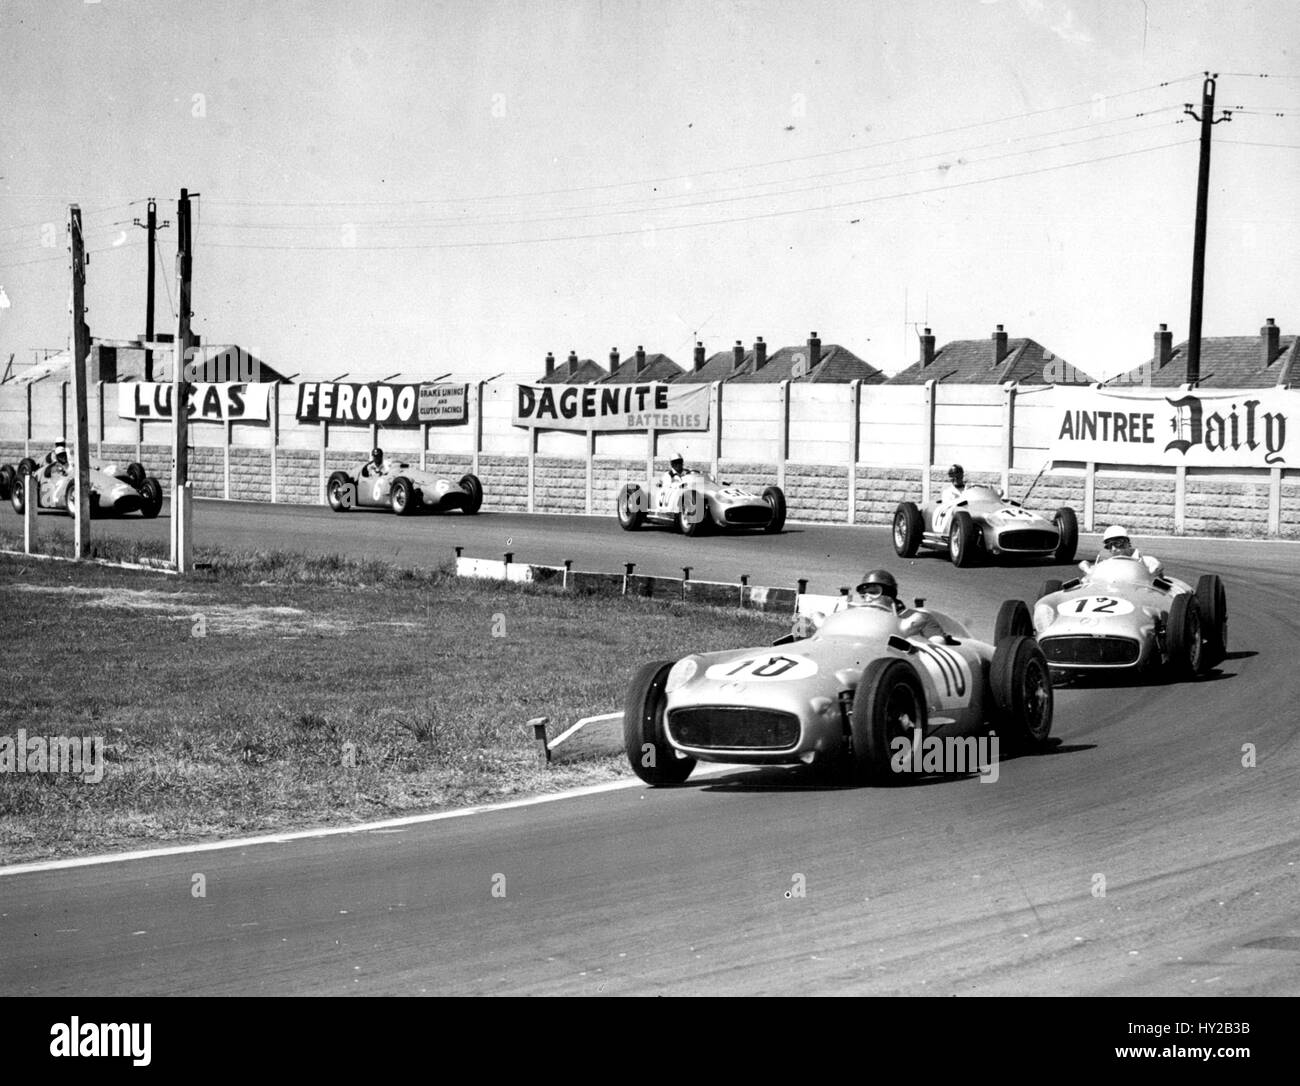 Jul. 17, 1955 - Stirling Moss Wins British Grand Prix At Aintree - Becomes First Briton To Win Event: Stirling Moss won the British Grand Prix before a record crowd of 125,000 over the Aintree, Liverpool, motor circuit yesterday, driving a Mercedes car at a speed of 86.47 m.p.h. for the 270 miles and thus became the first Briton to win the British Grand Prix. The first three men drove Mercedes cars-Stirling Moss, Juan Fangio, second and Karl Kling third. Photo shows Juan Fangio leading Stirling Moss at Anchor Crossing during the race. (Credit Image: © Keystone Press Agency/Keystone USA via ZUM Stock Photo